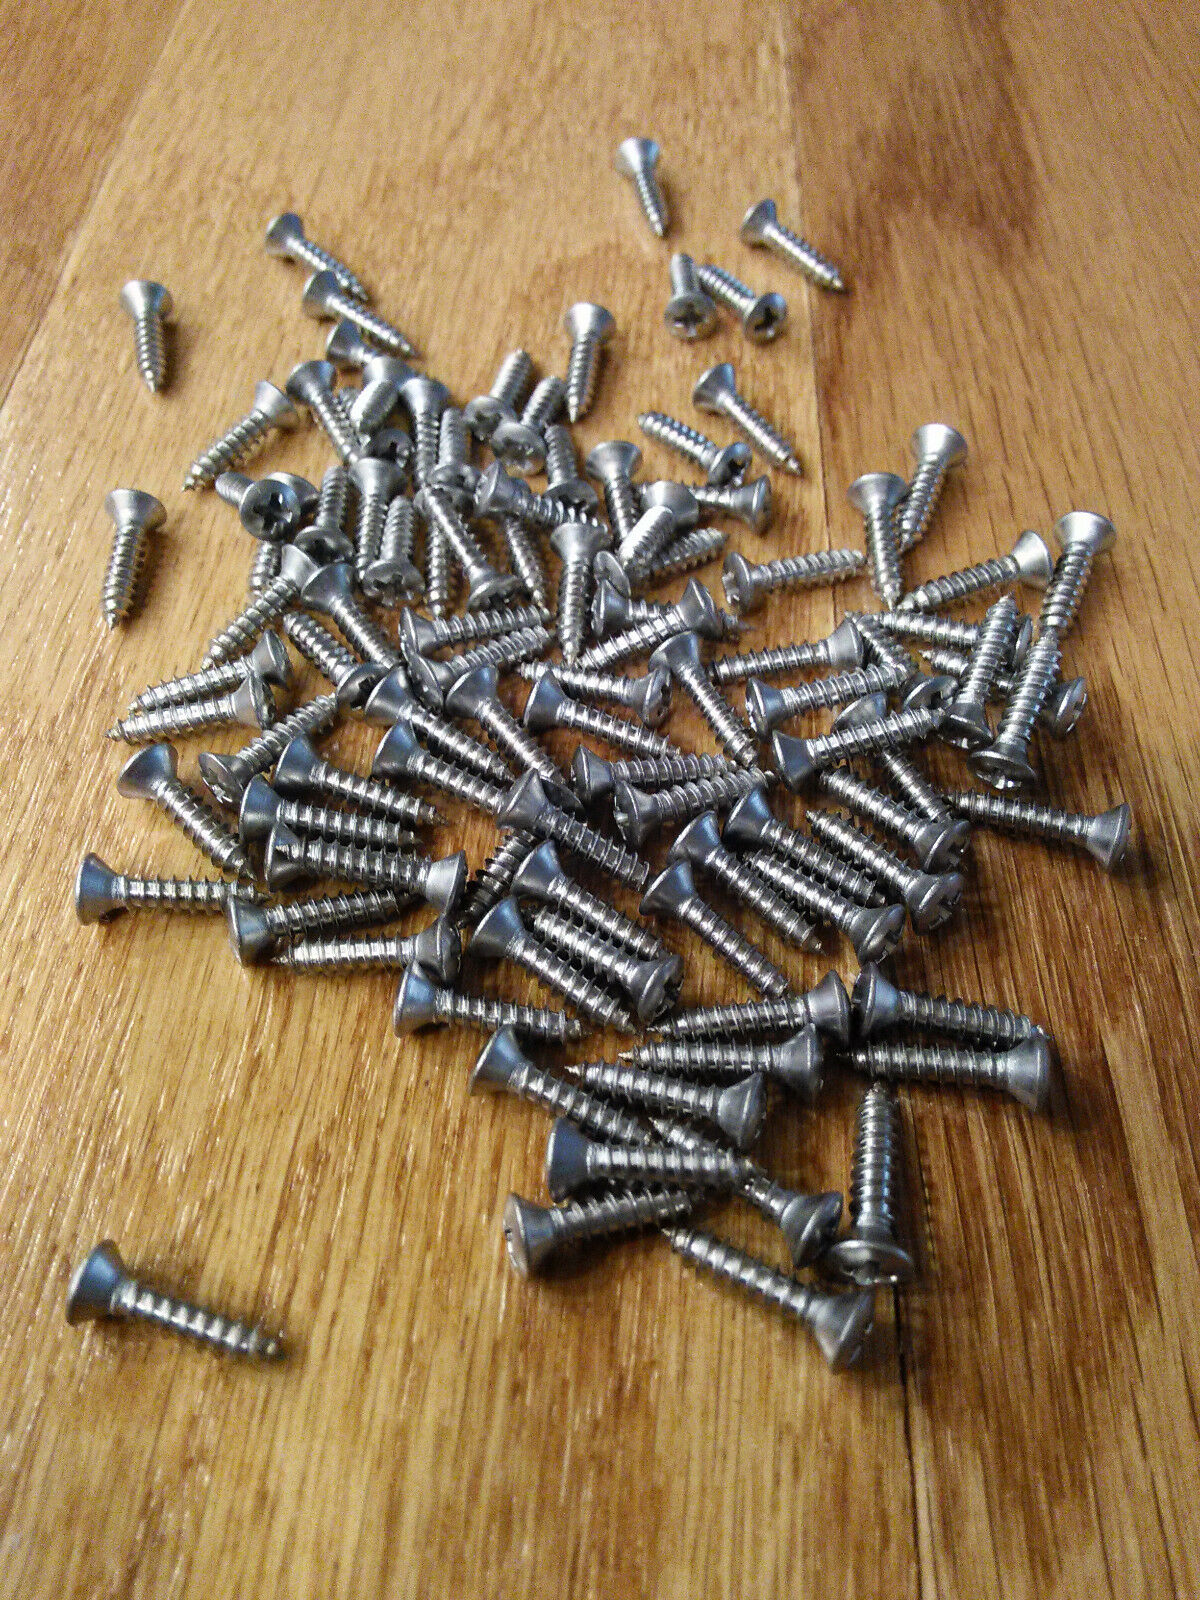 100 Stainless Steel Replacement Pickguard Screws For Stratocaster Style Guitars